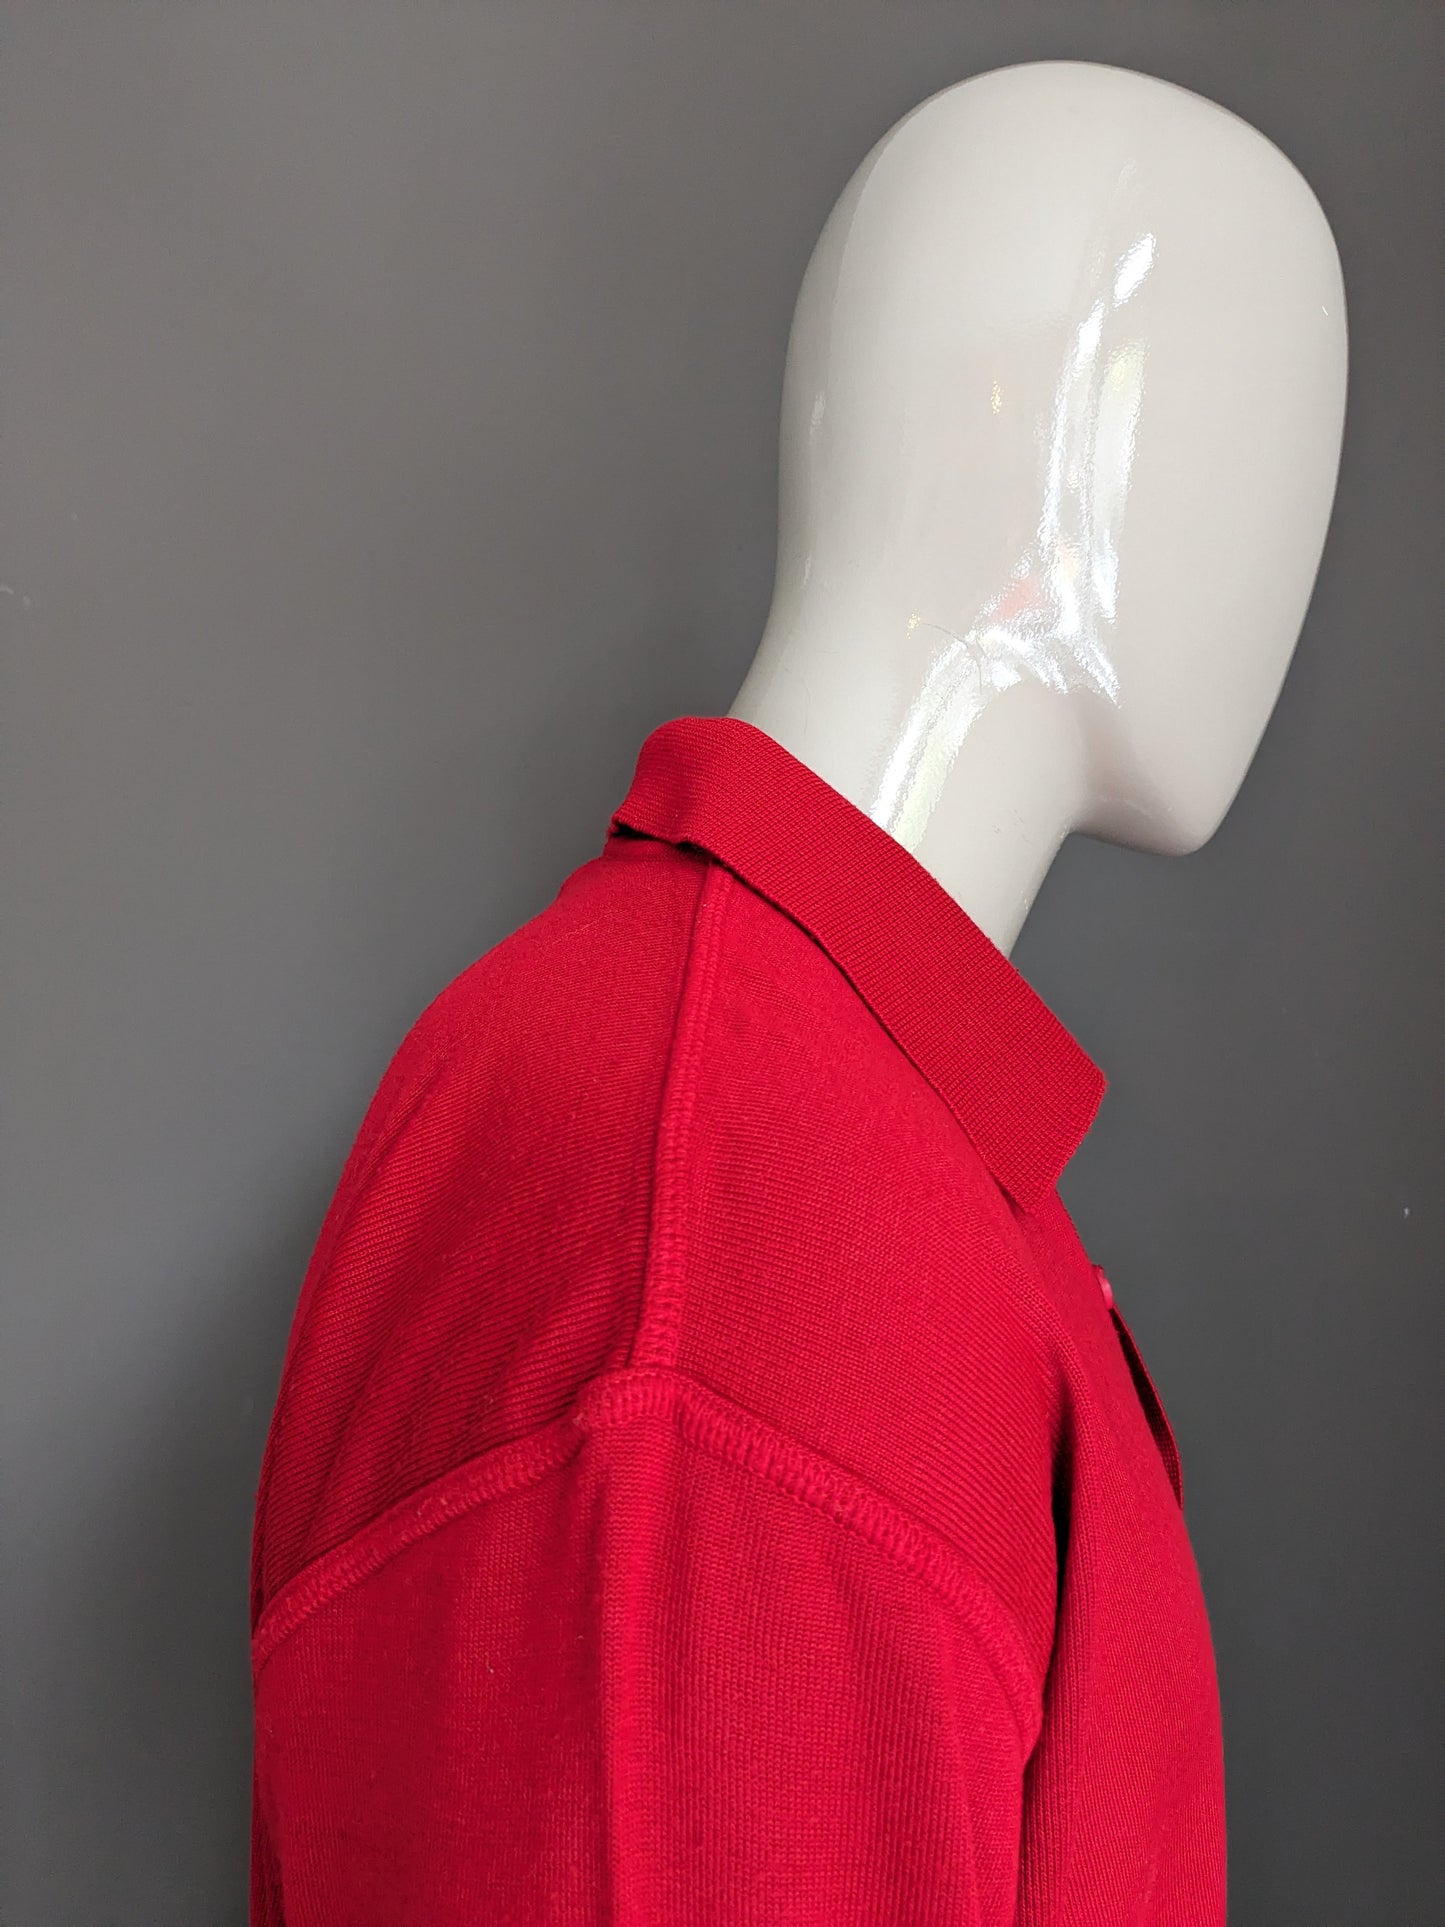 Vintage N.L.F. Wool polo sweater with buttons. Colored red. Size 2XL / XXL. 50% wool.